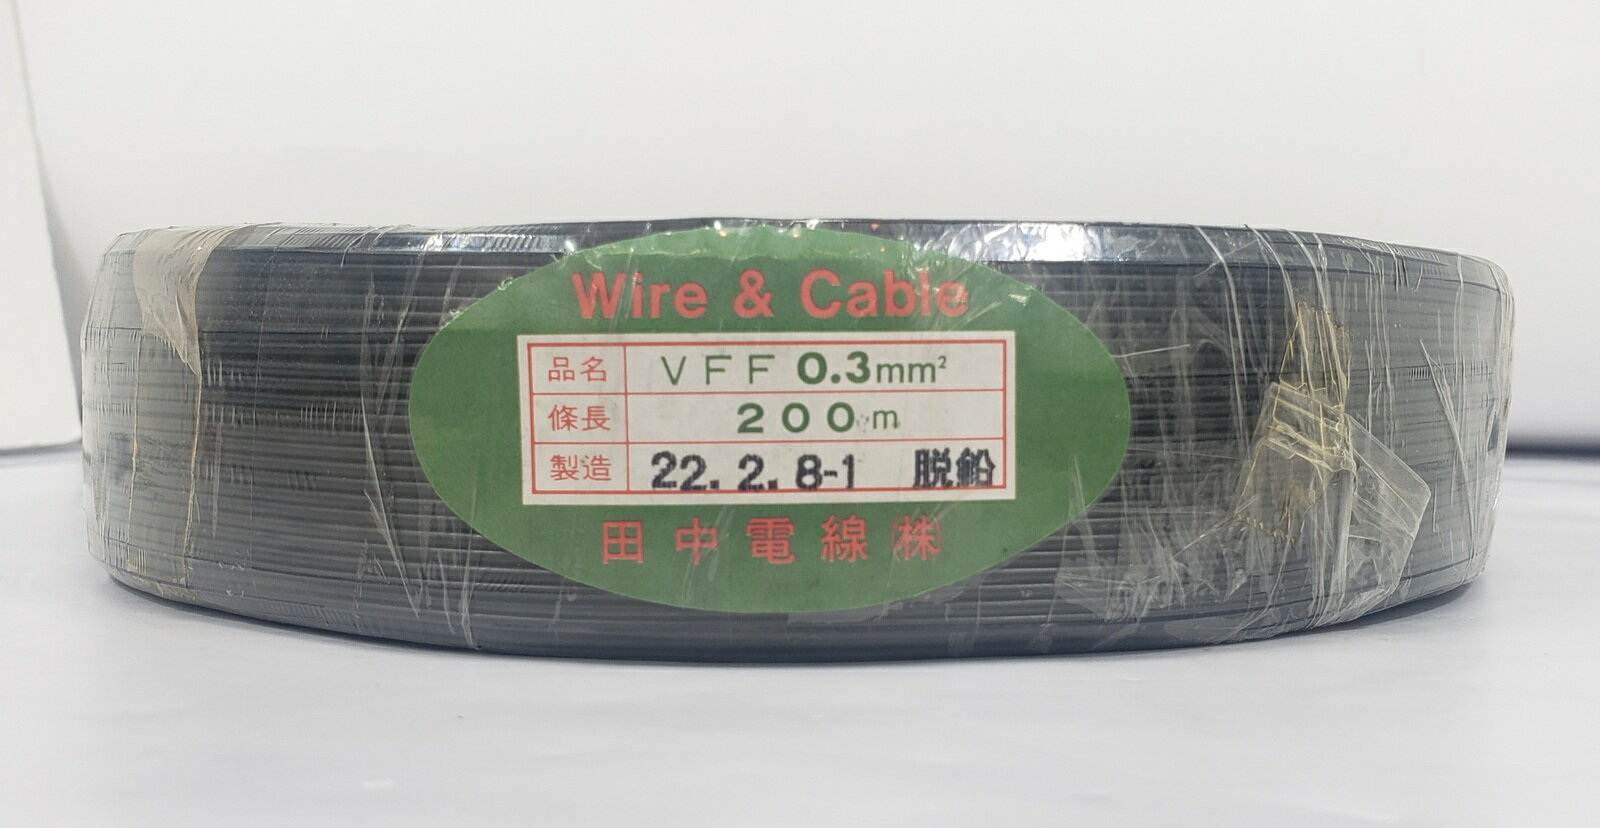  VFF ֥ 0.3200m Wire&Cable